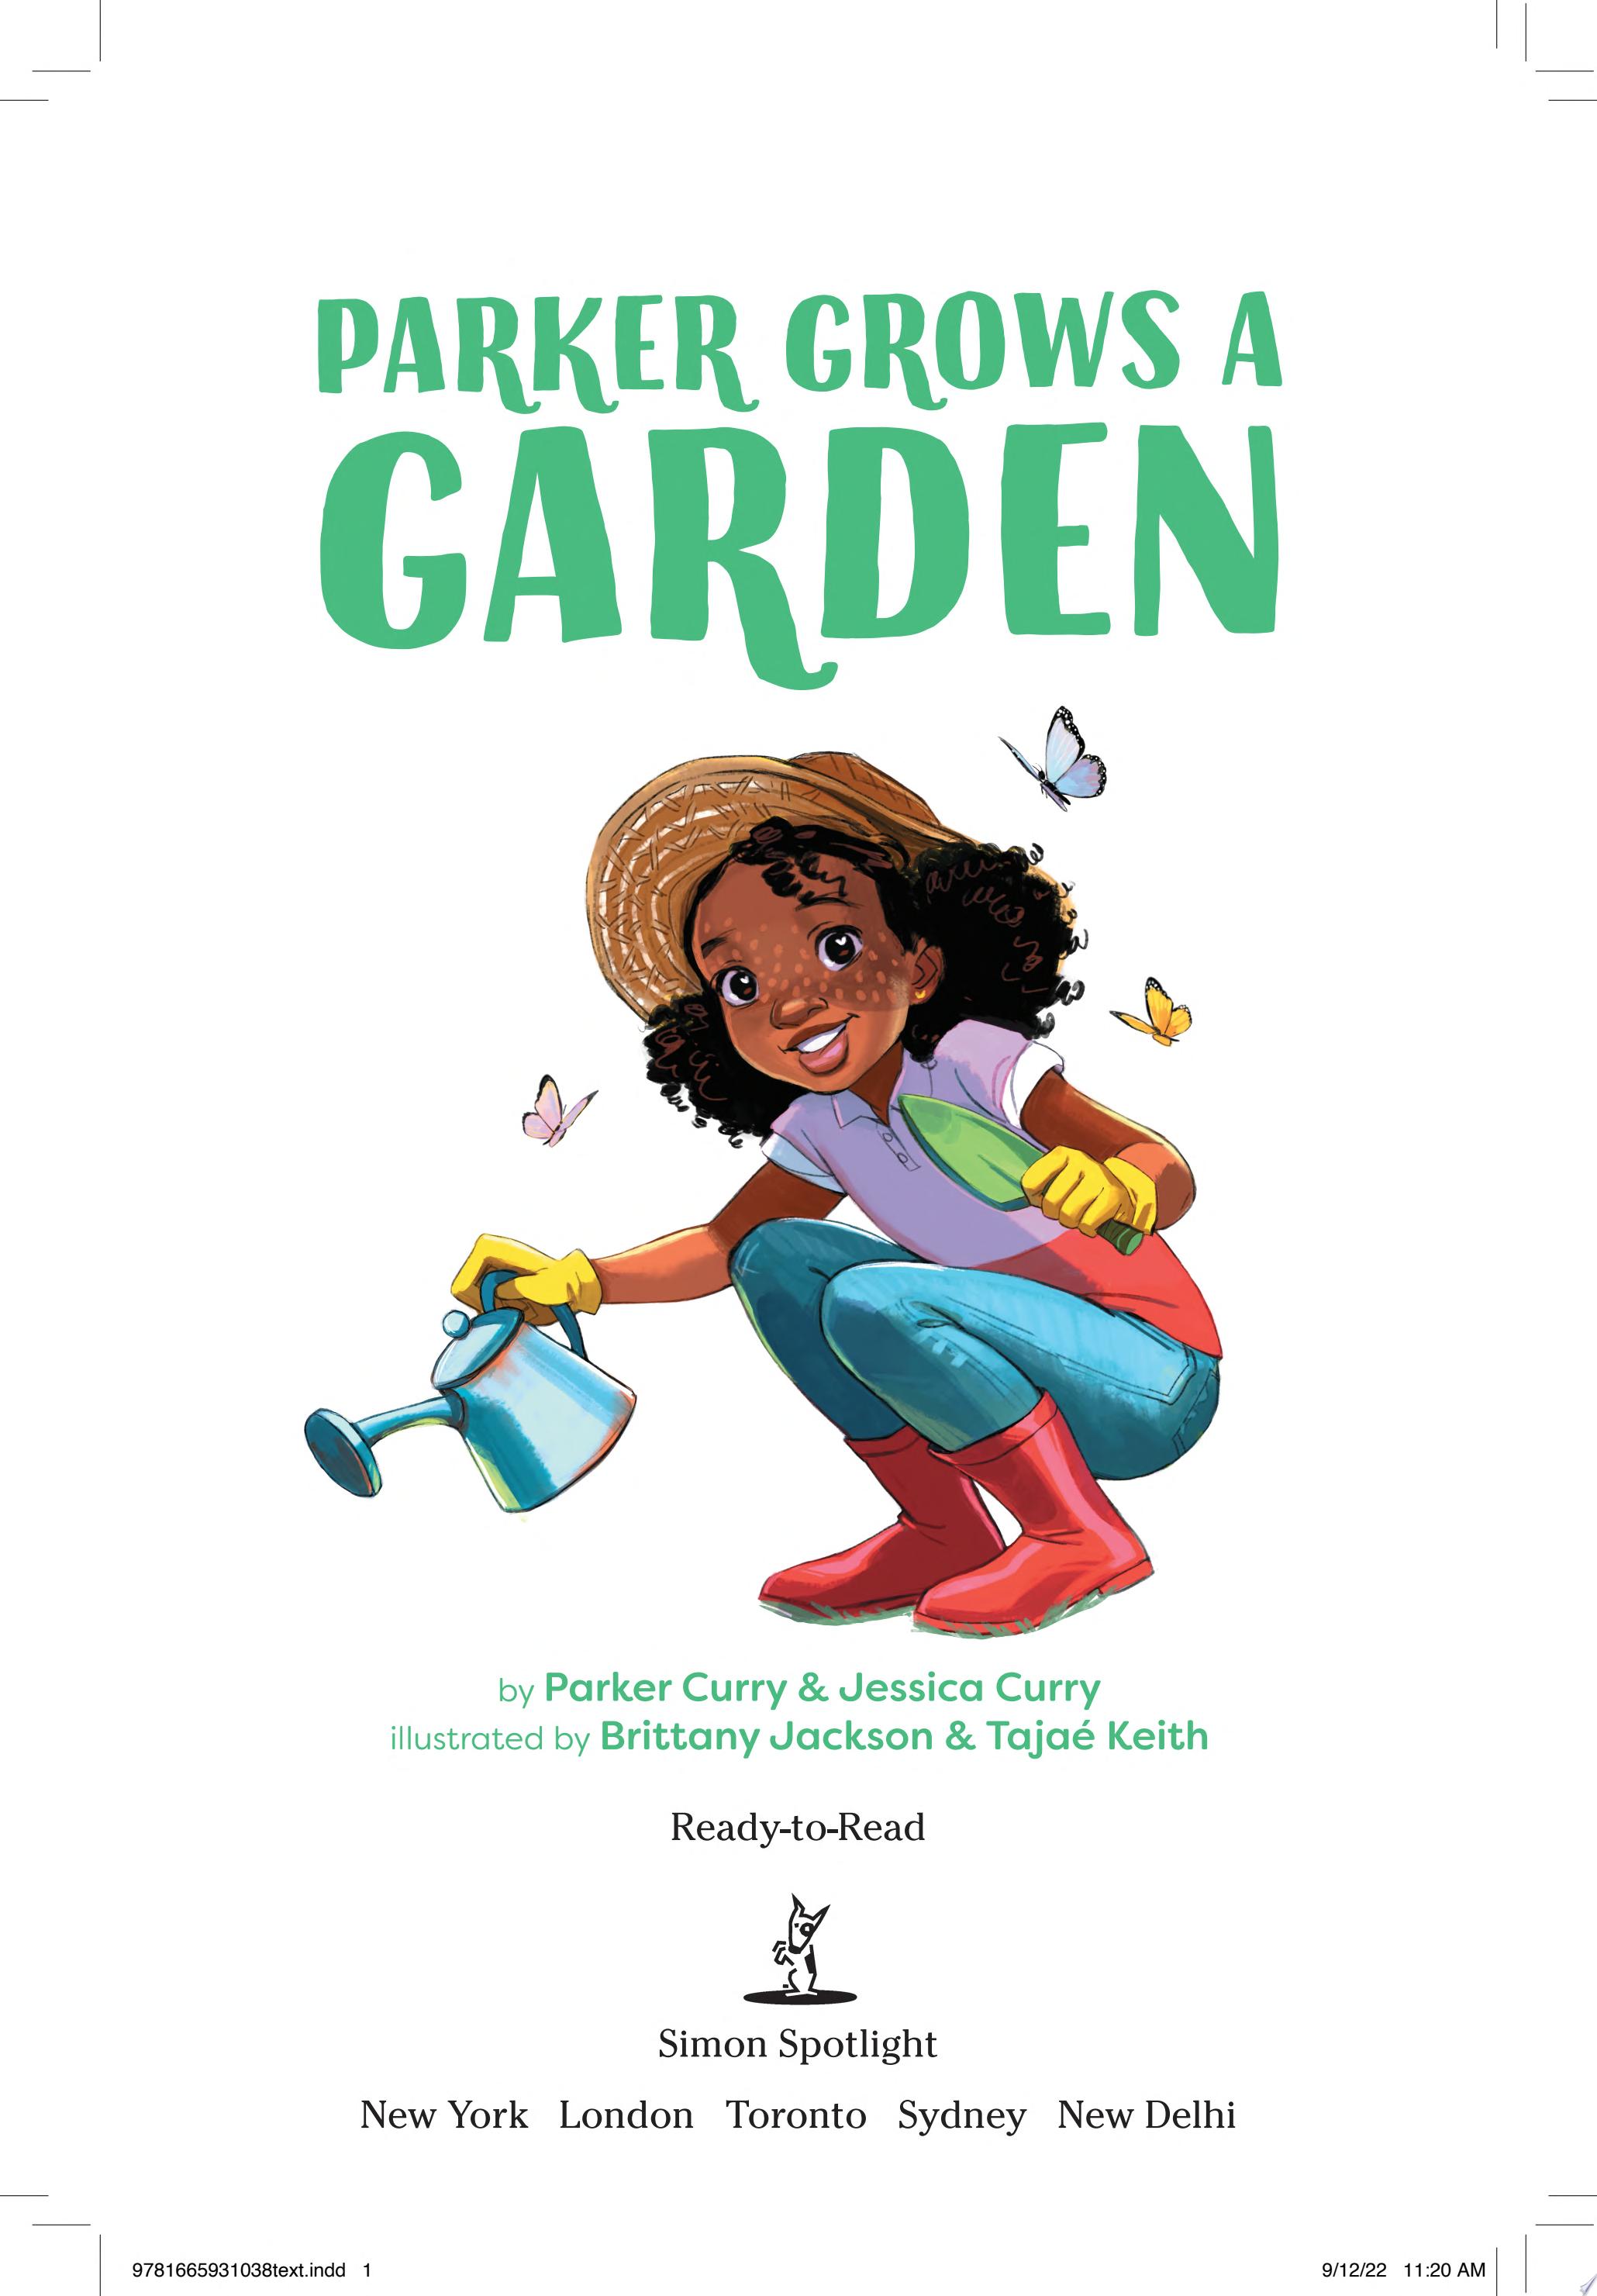 Image for "Parker Grows a Garden"